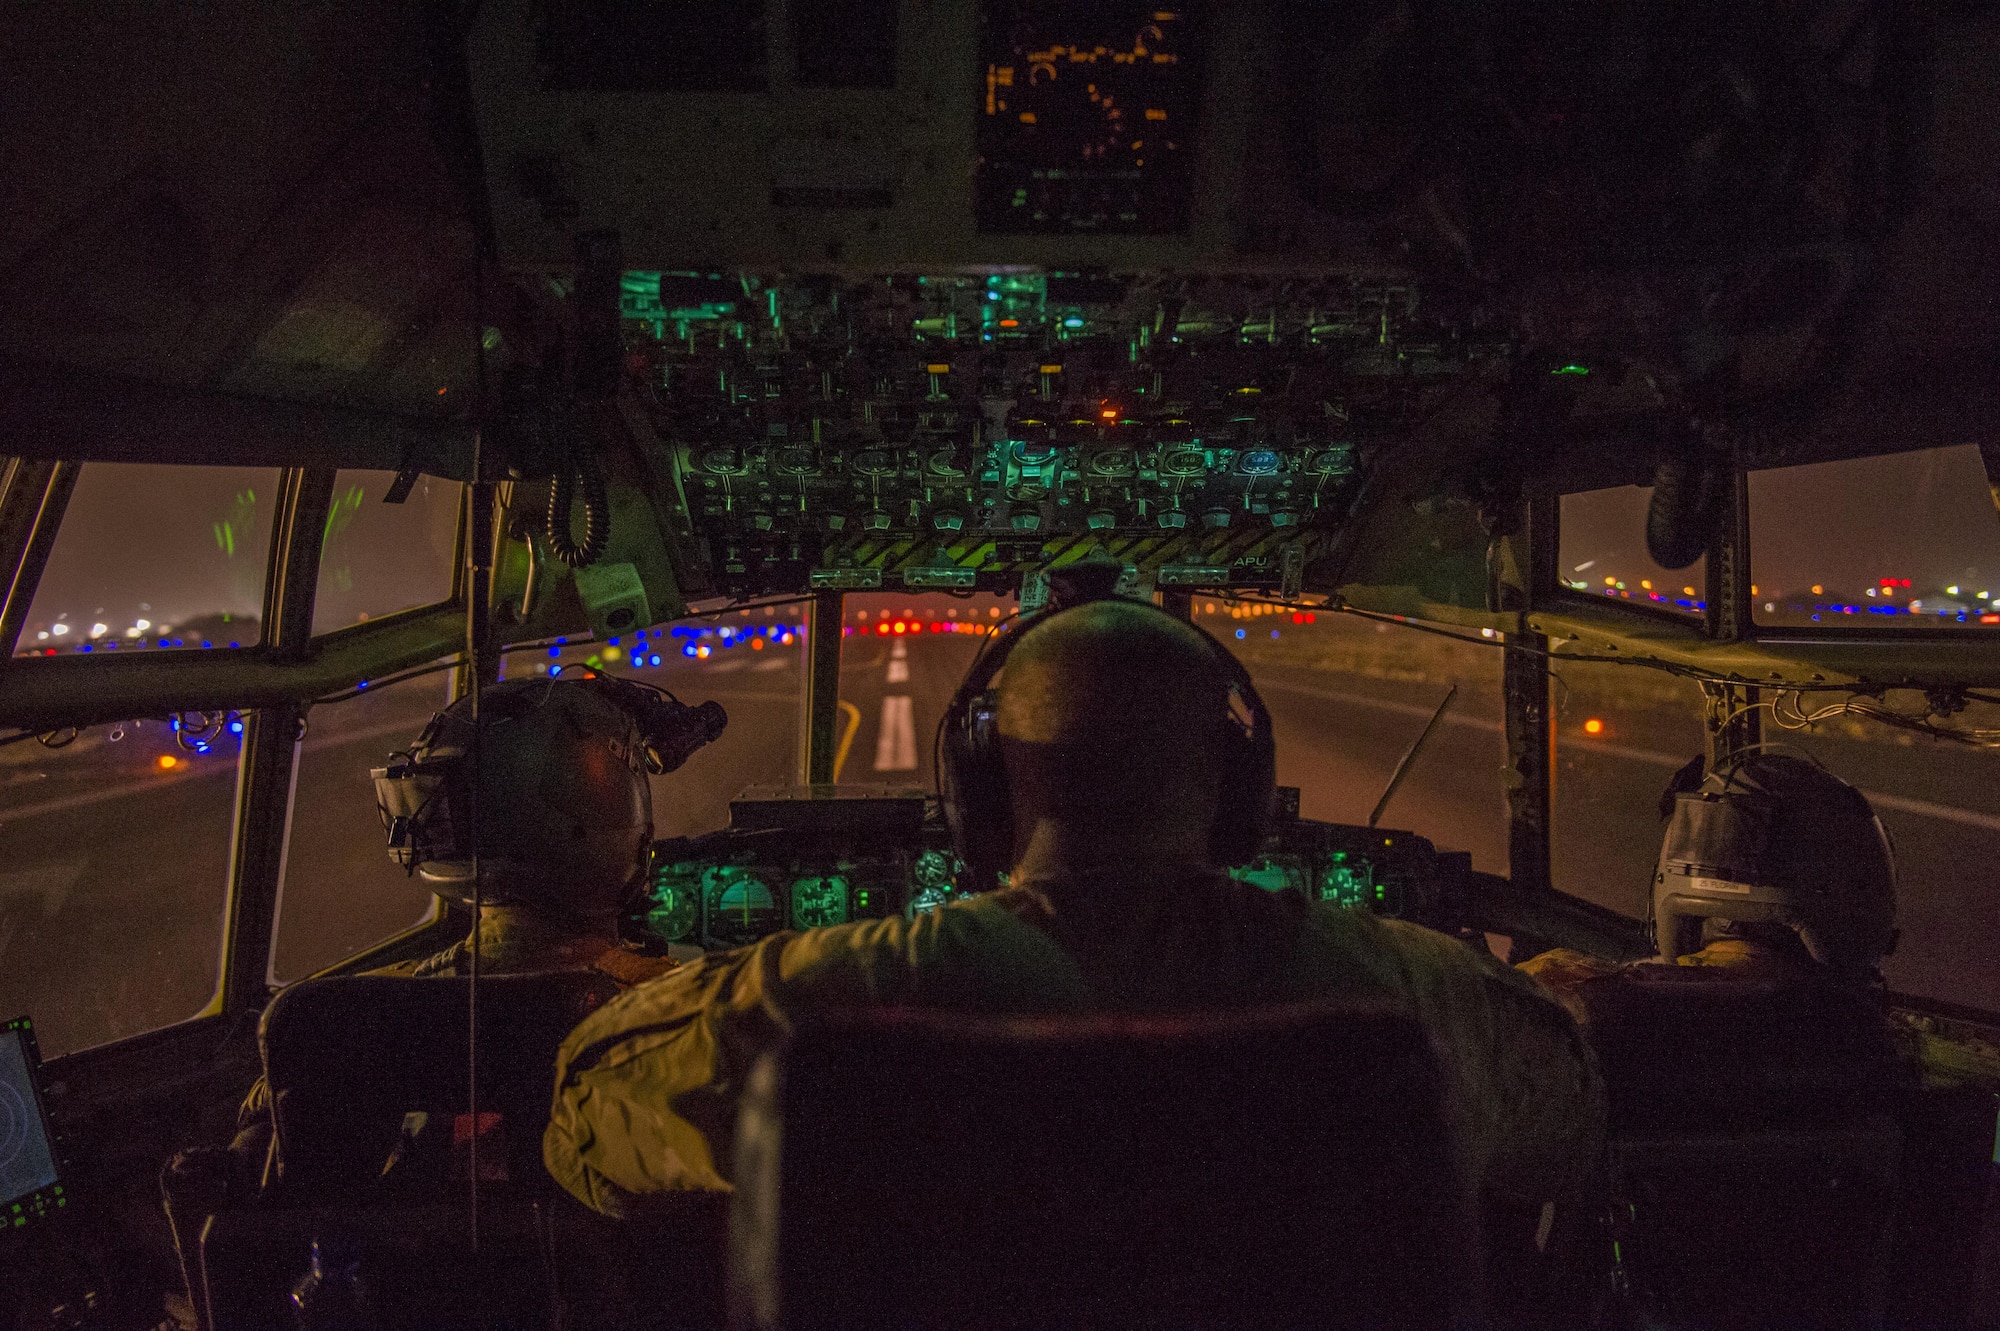 U.S. Air Force pilots from the Alaska Air National Guard's 144th Airlift Squadron prepare to take off in a C-130 Hercules at an undisclosed location in Southwest Asia, June 17, 2016. The transport mission was one of the last combat missions during the 144th AS's final C-130 deployment. (U.S. Air Force photo by Staff Sgt. Douglas Ellis/Released)